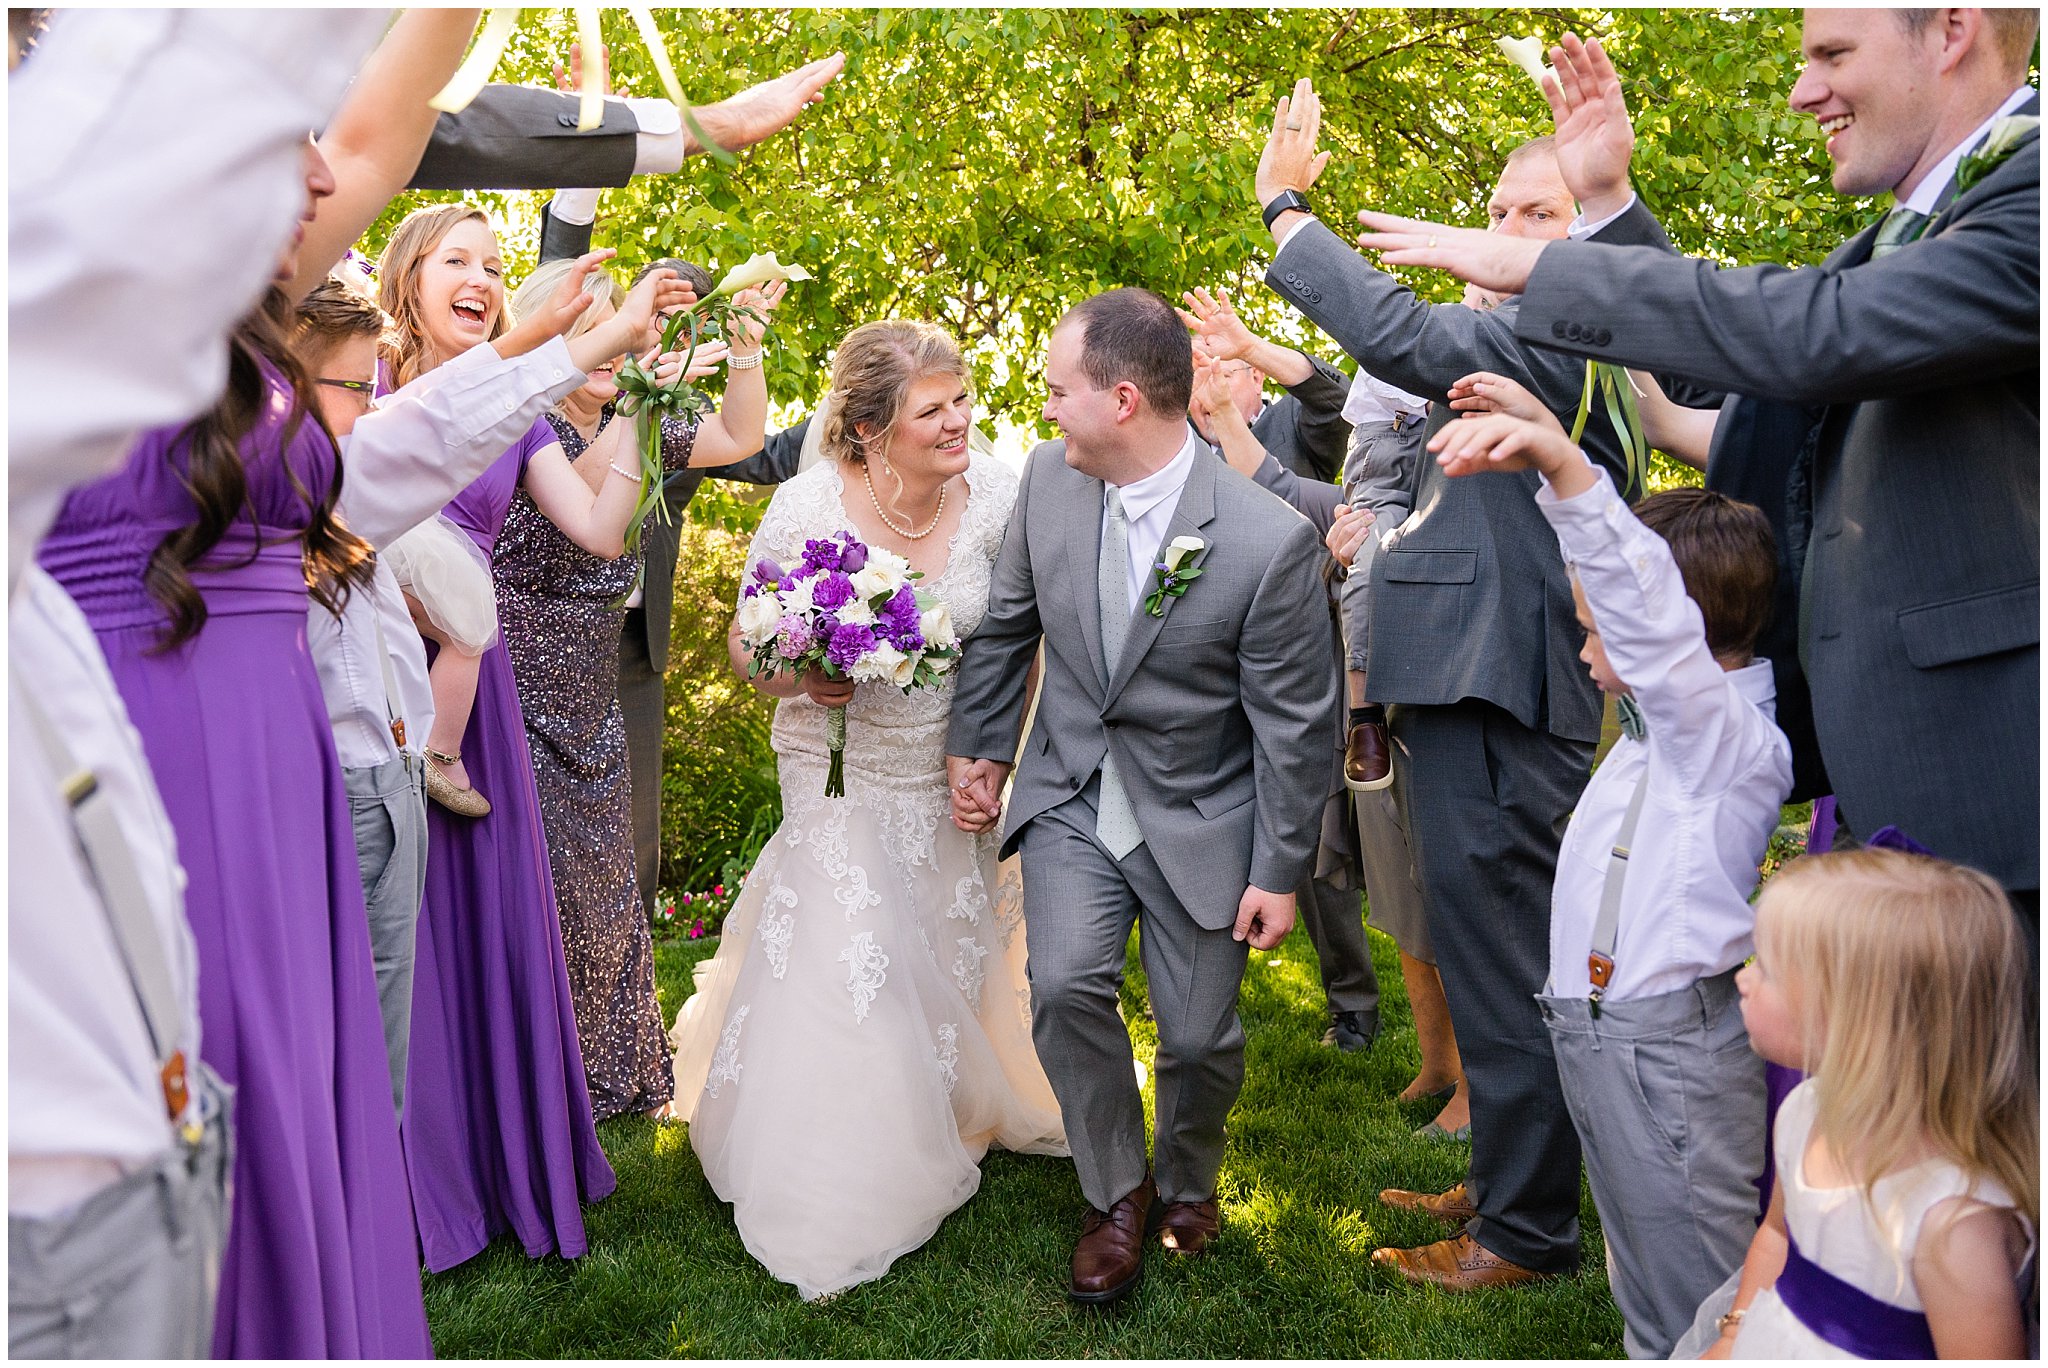 Bride and groom with wedding party and family | Oquirrh Mountain Temple and Millennial Falls Wedding | Jessie and Dallin Photography